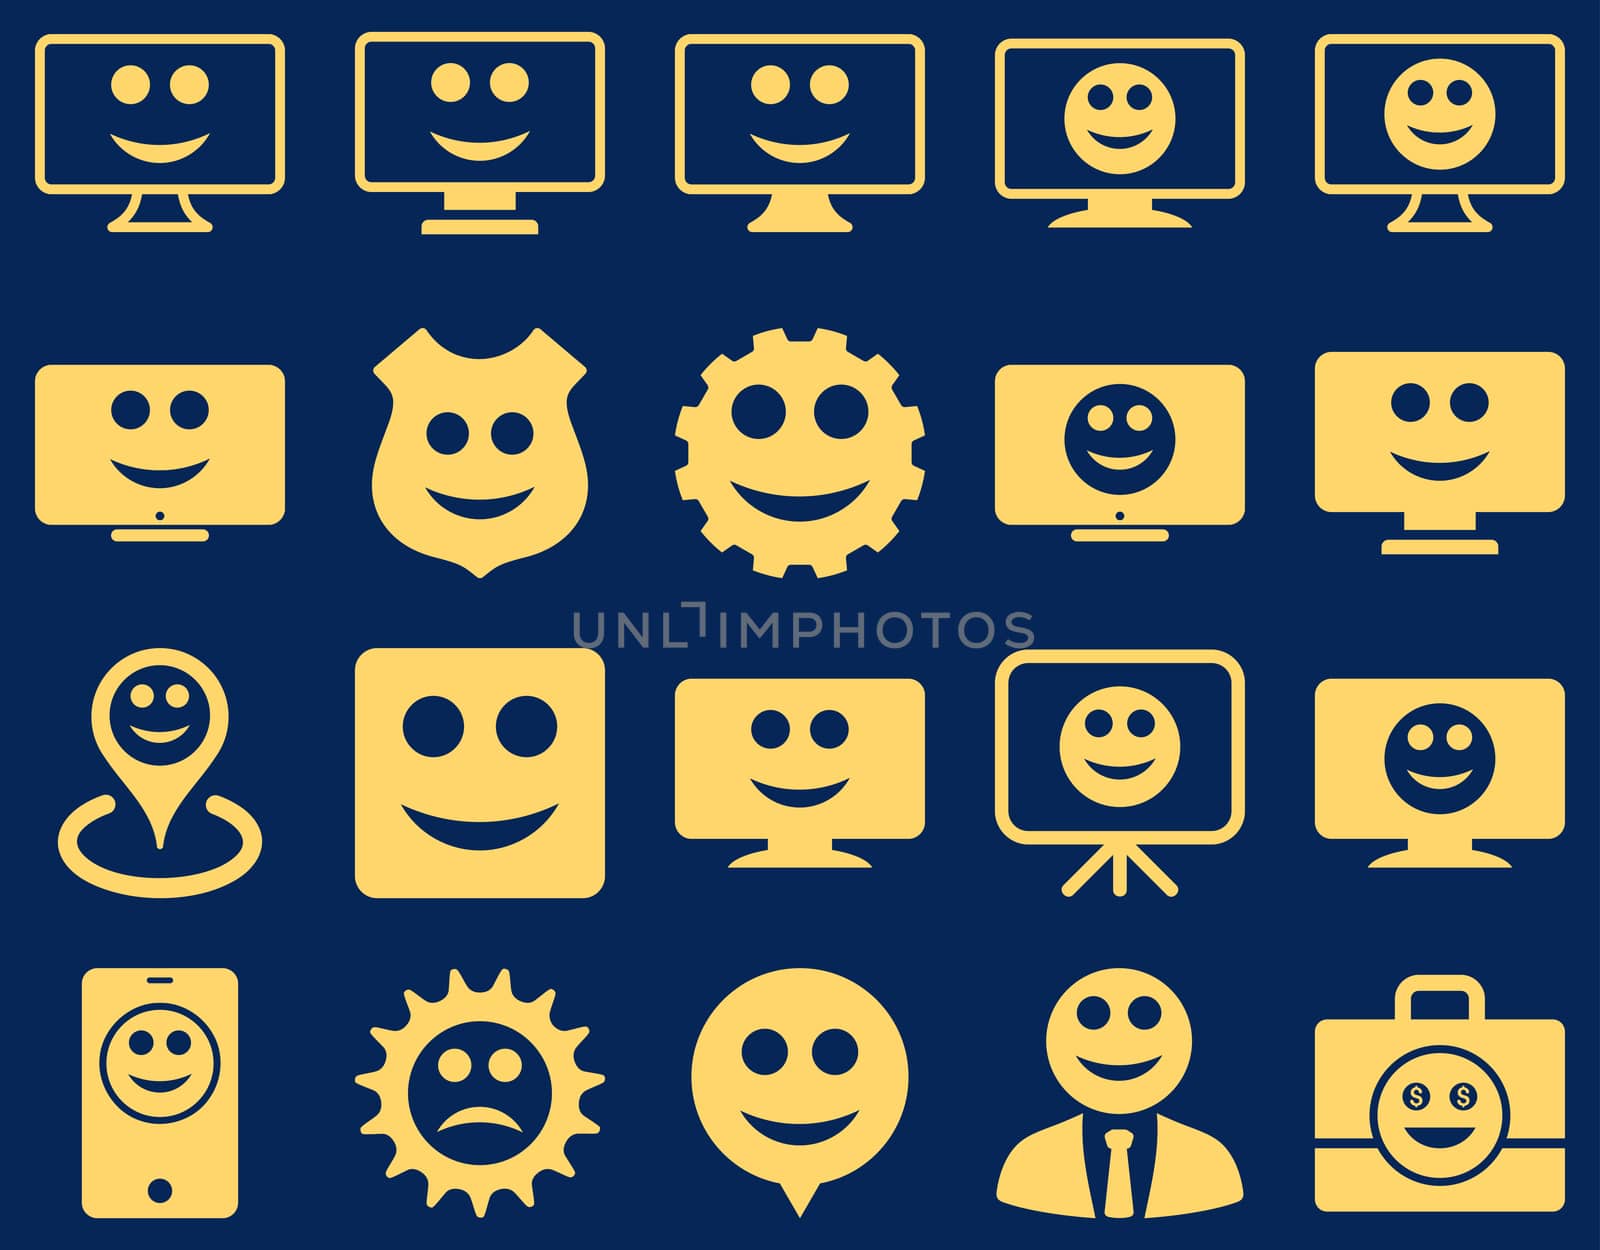 Tools, gears, smiles, dilspays icons. Glyph set style is flat images, yellow symbols, isolated on a blue background.